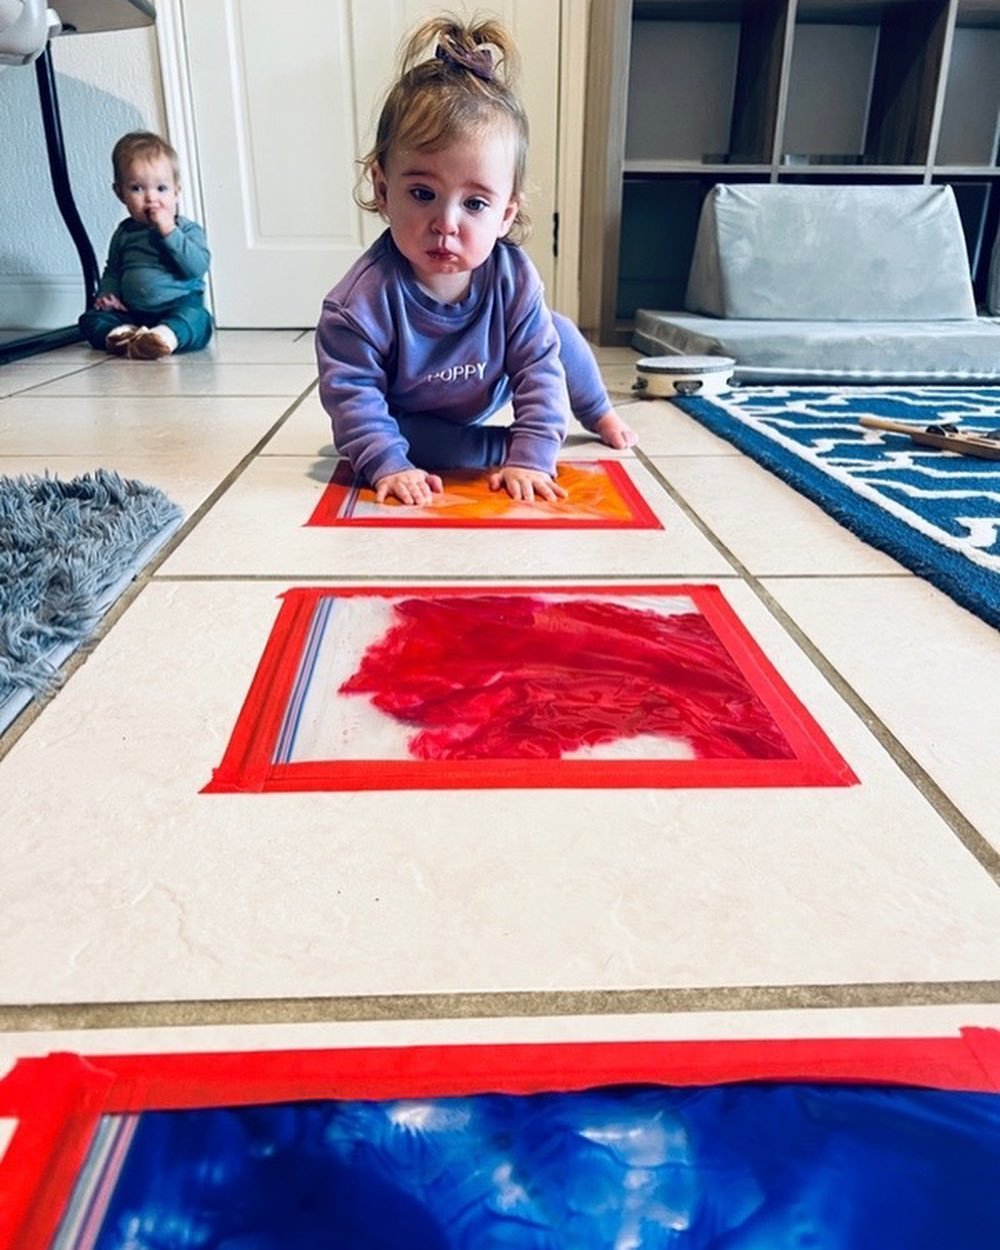  Art for everyone! Our youngest Havenwood students get to explore their sense of touch while learning about geometry and colors with this creative and mess free activity! 🎨 